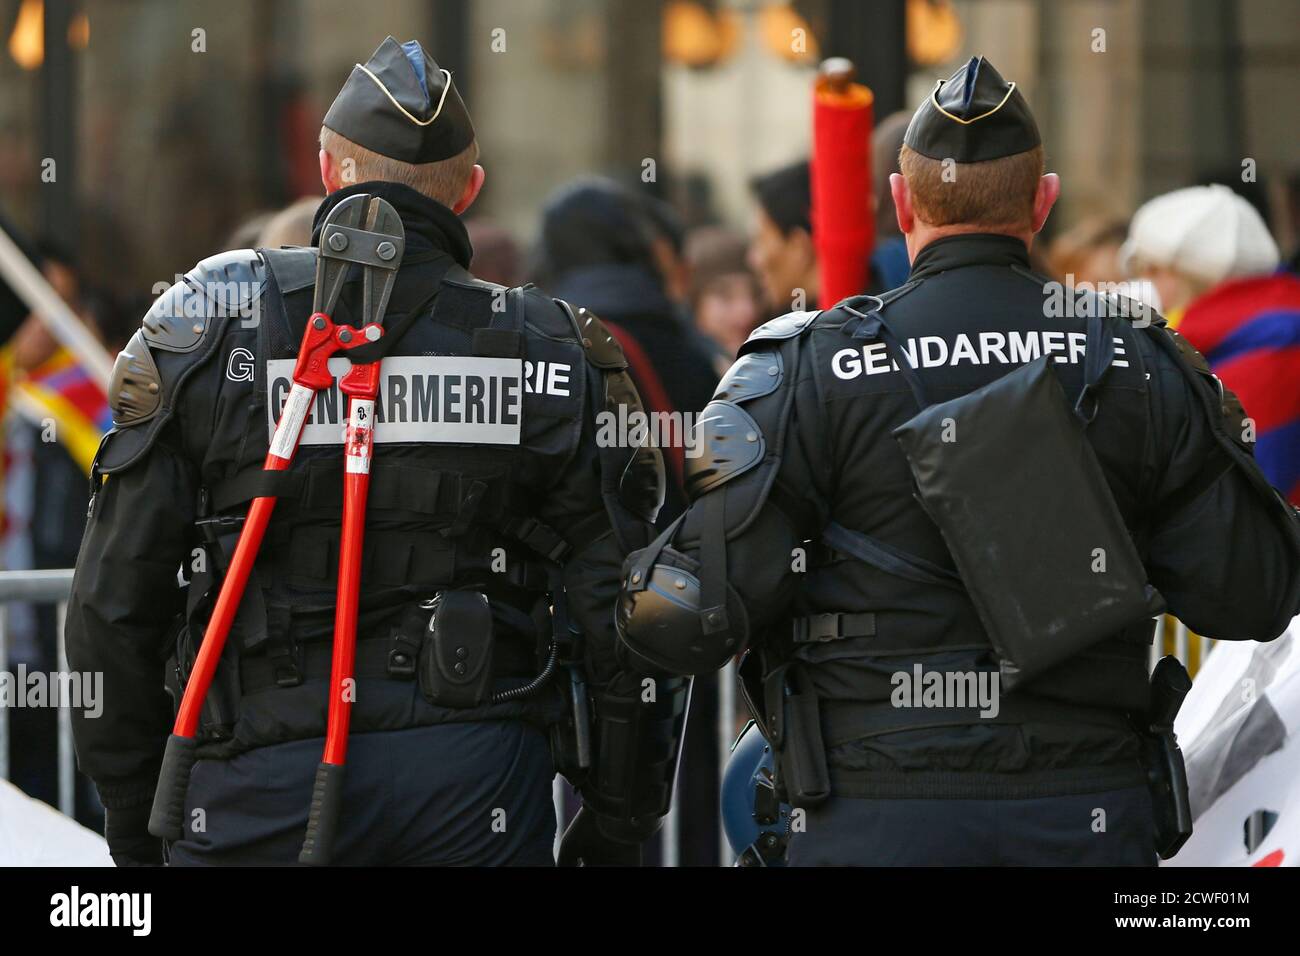 A French gendarme carries a pair of bolt cutters during a demonstration of  Pro-Tibet activists near the Chinese embassy in Paris February 13, 2013.  REUTERS/Charles Platiau (FRANCE - Tags: POLITICS CIVIL UNREST